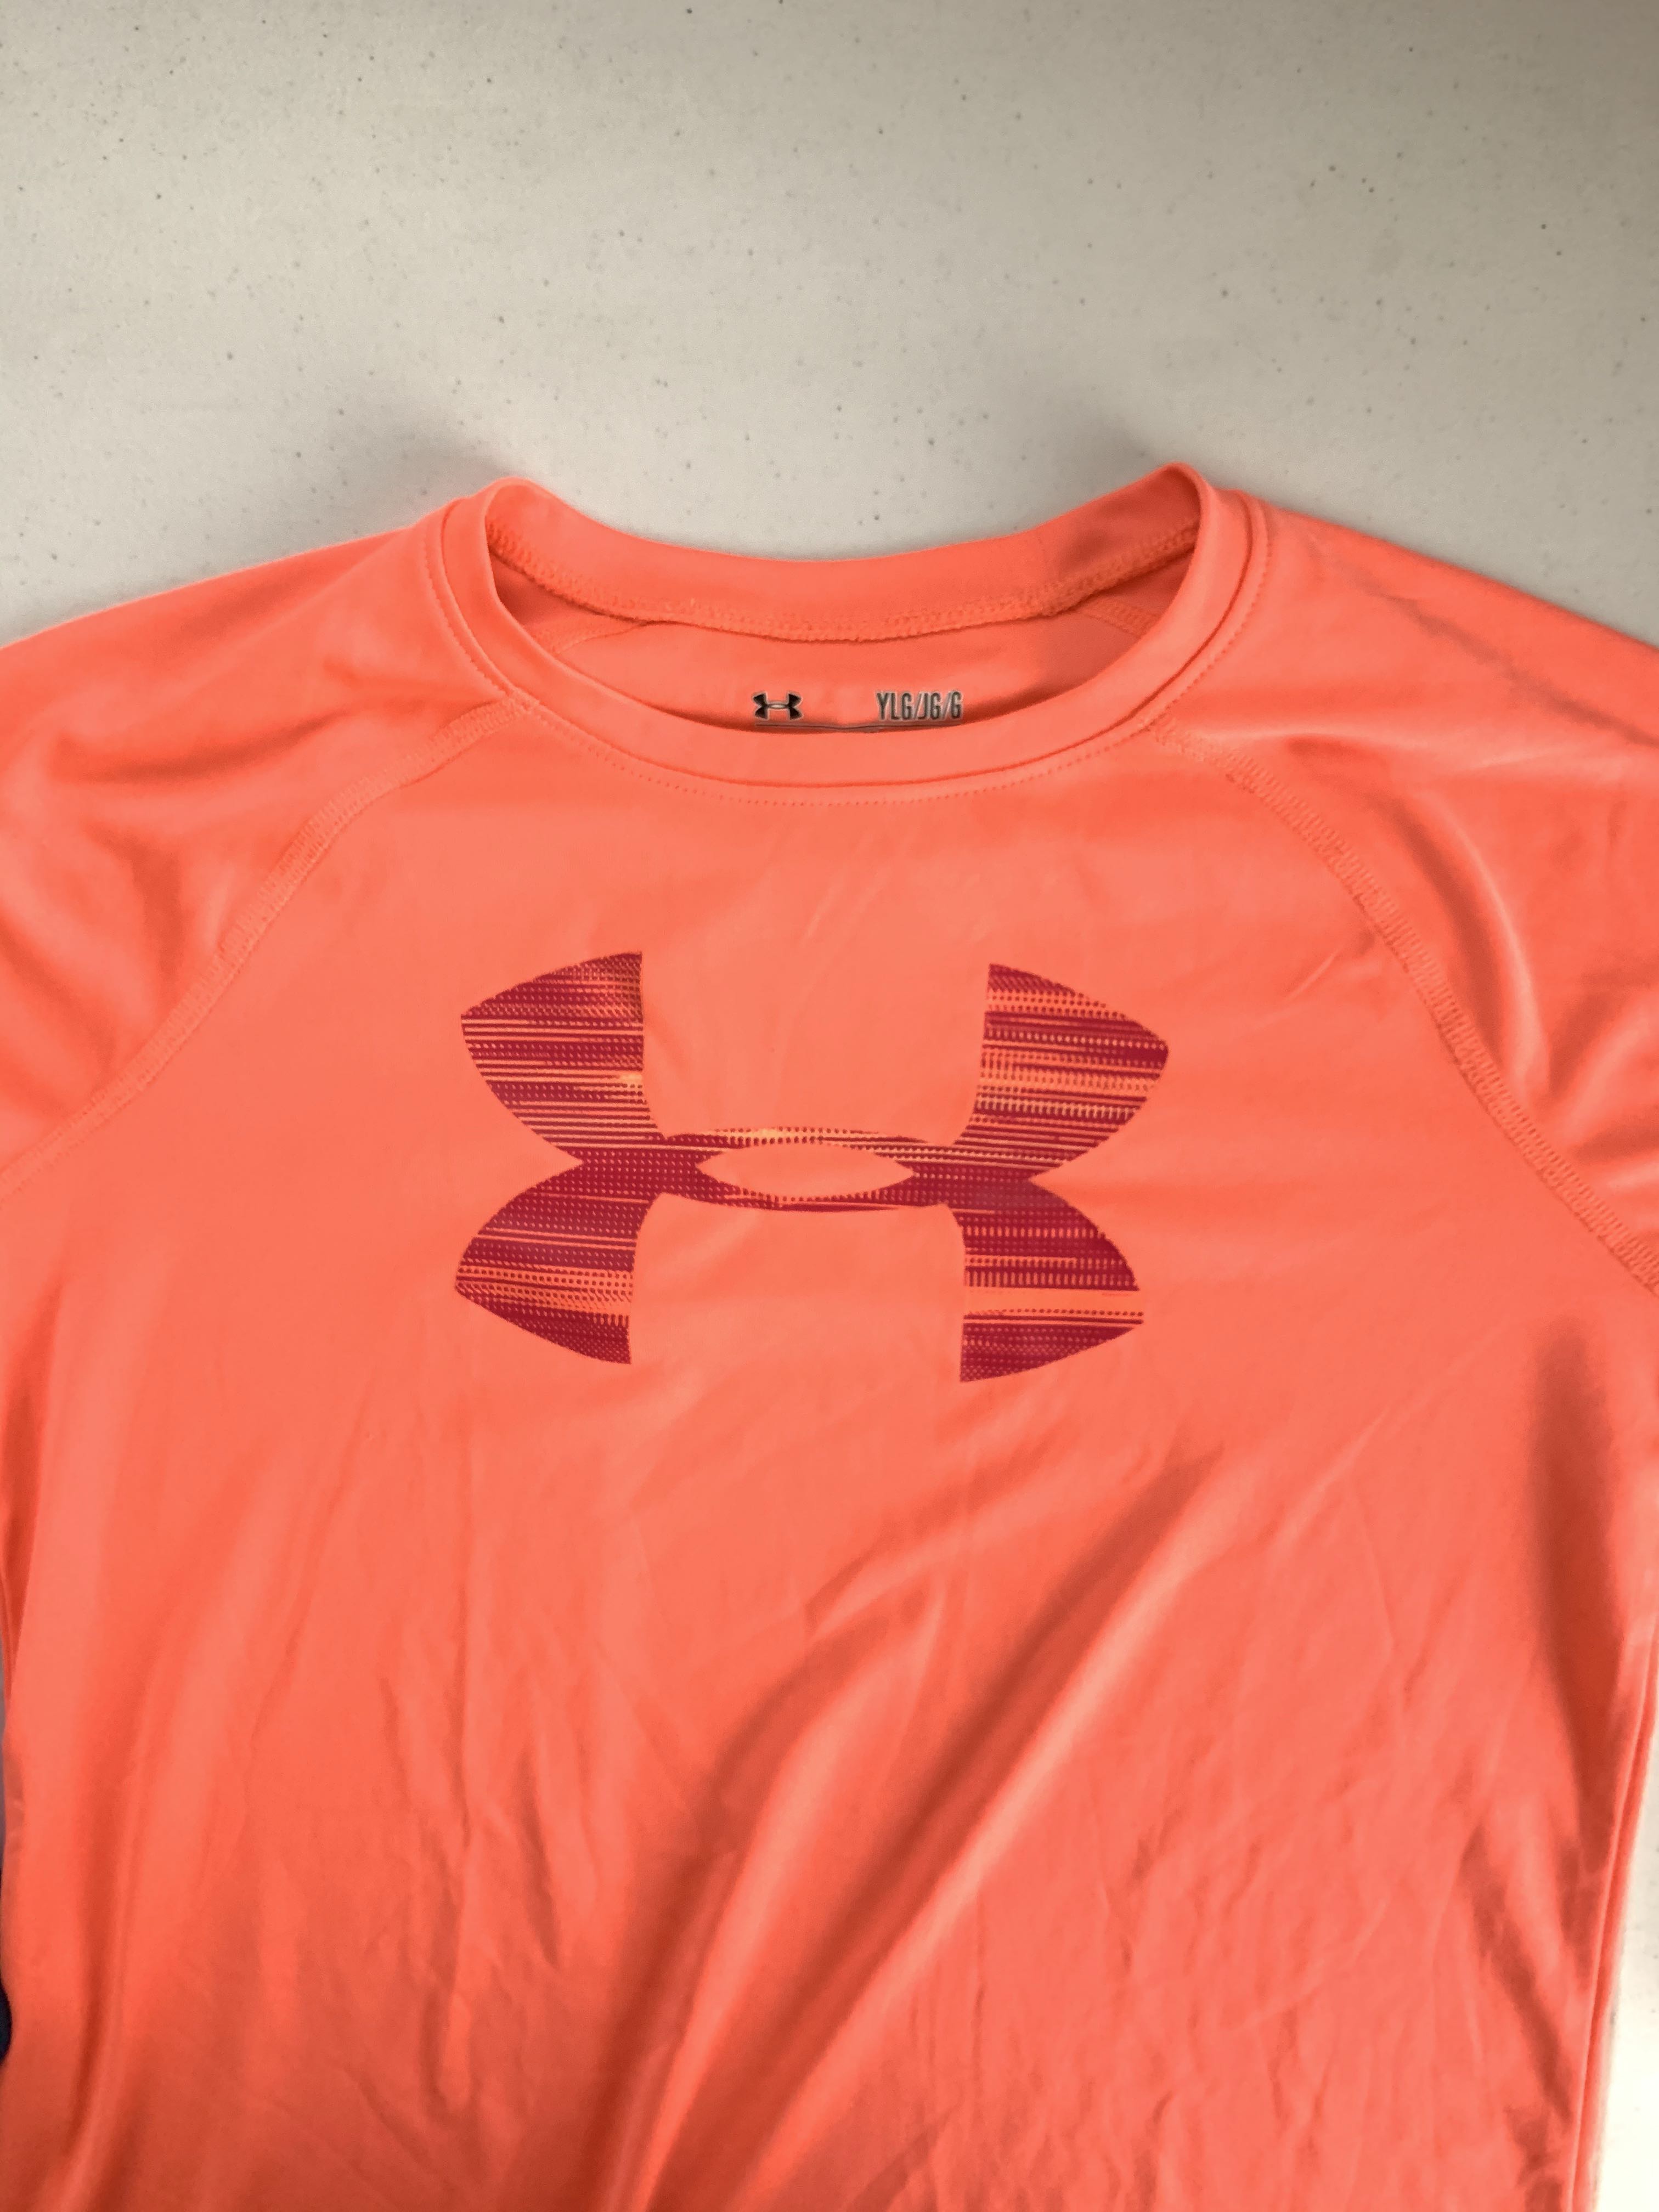 under armour dry fit shirts